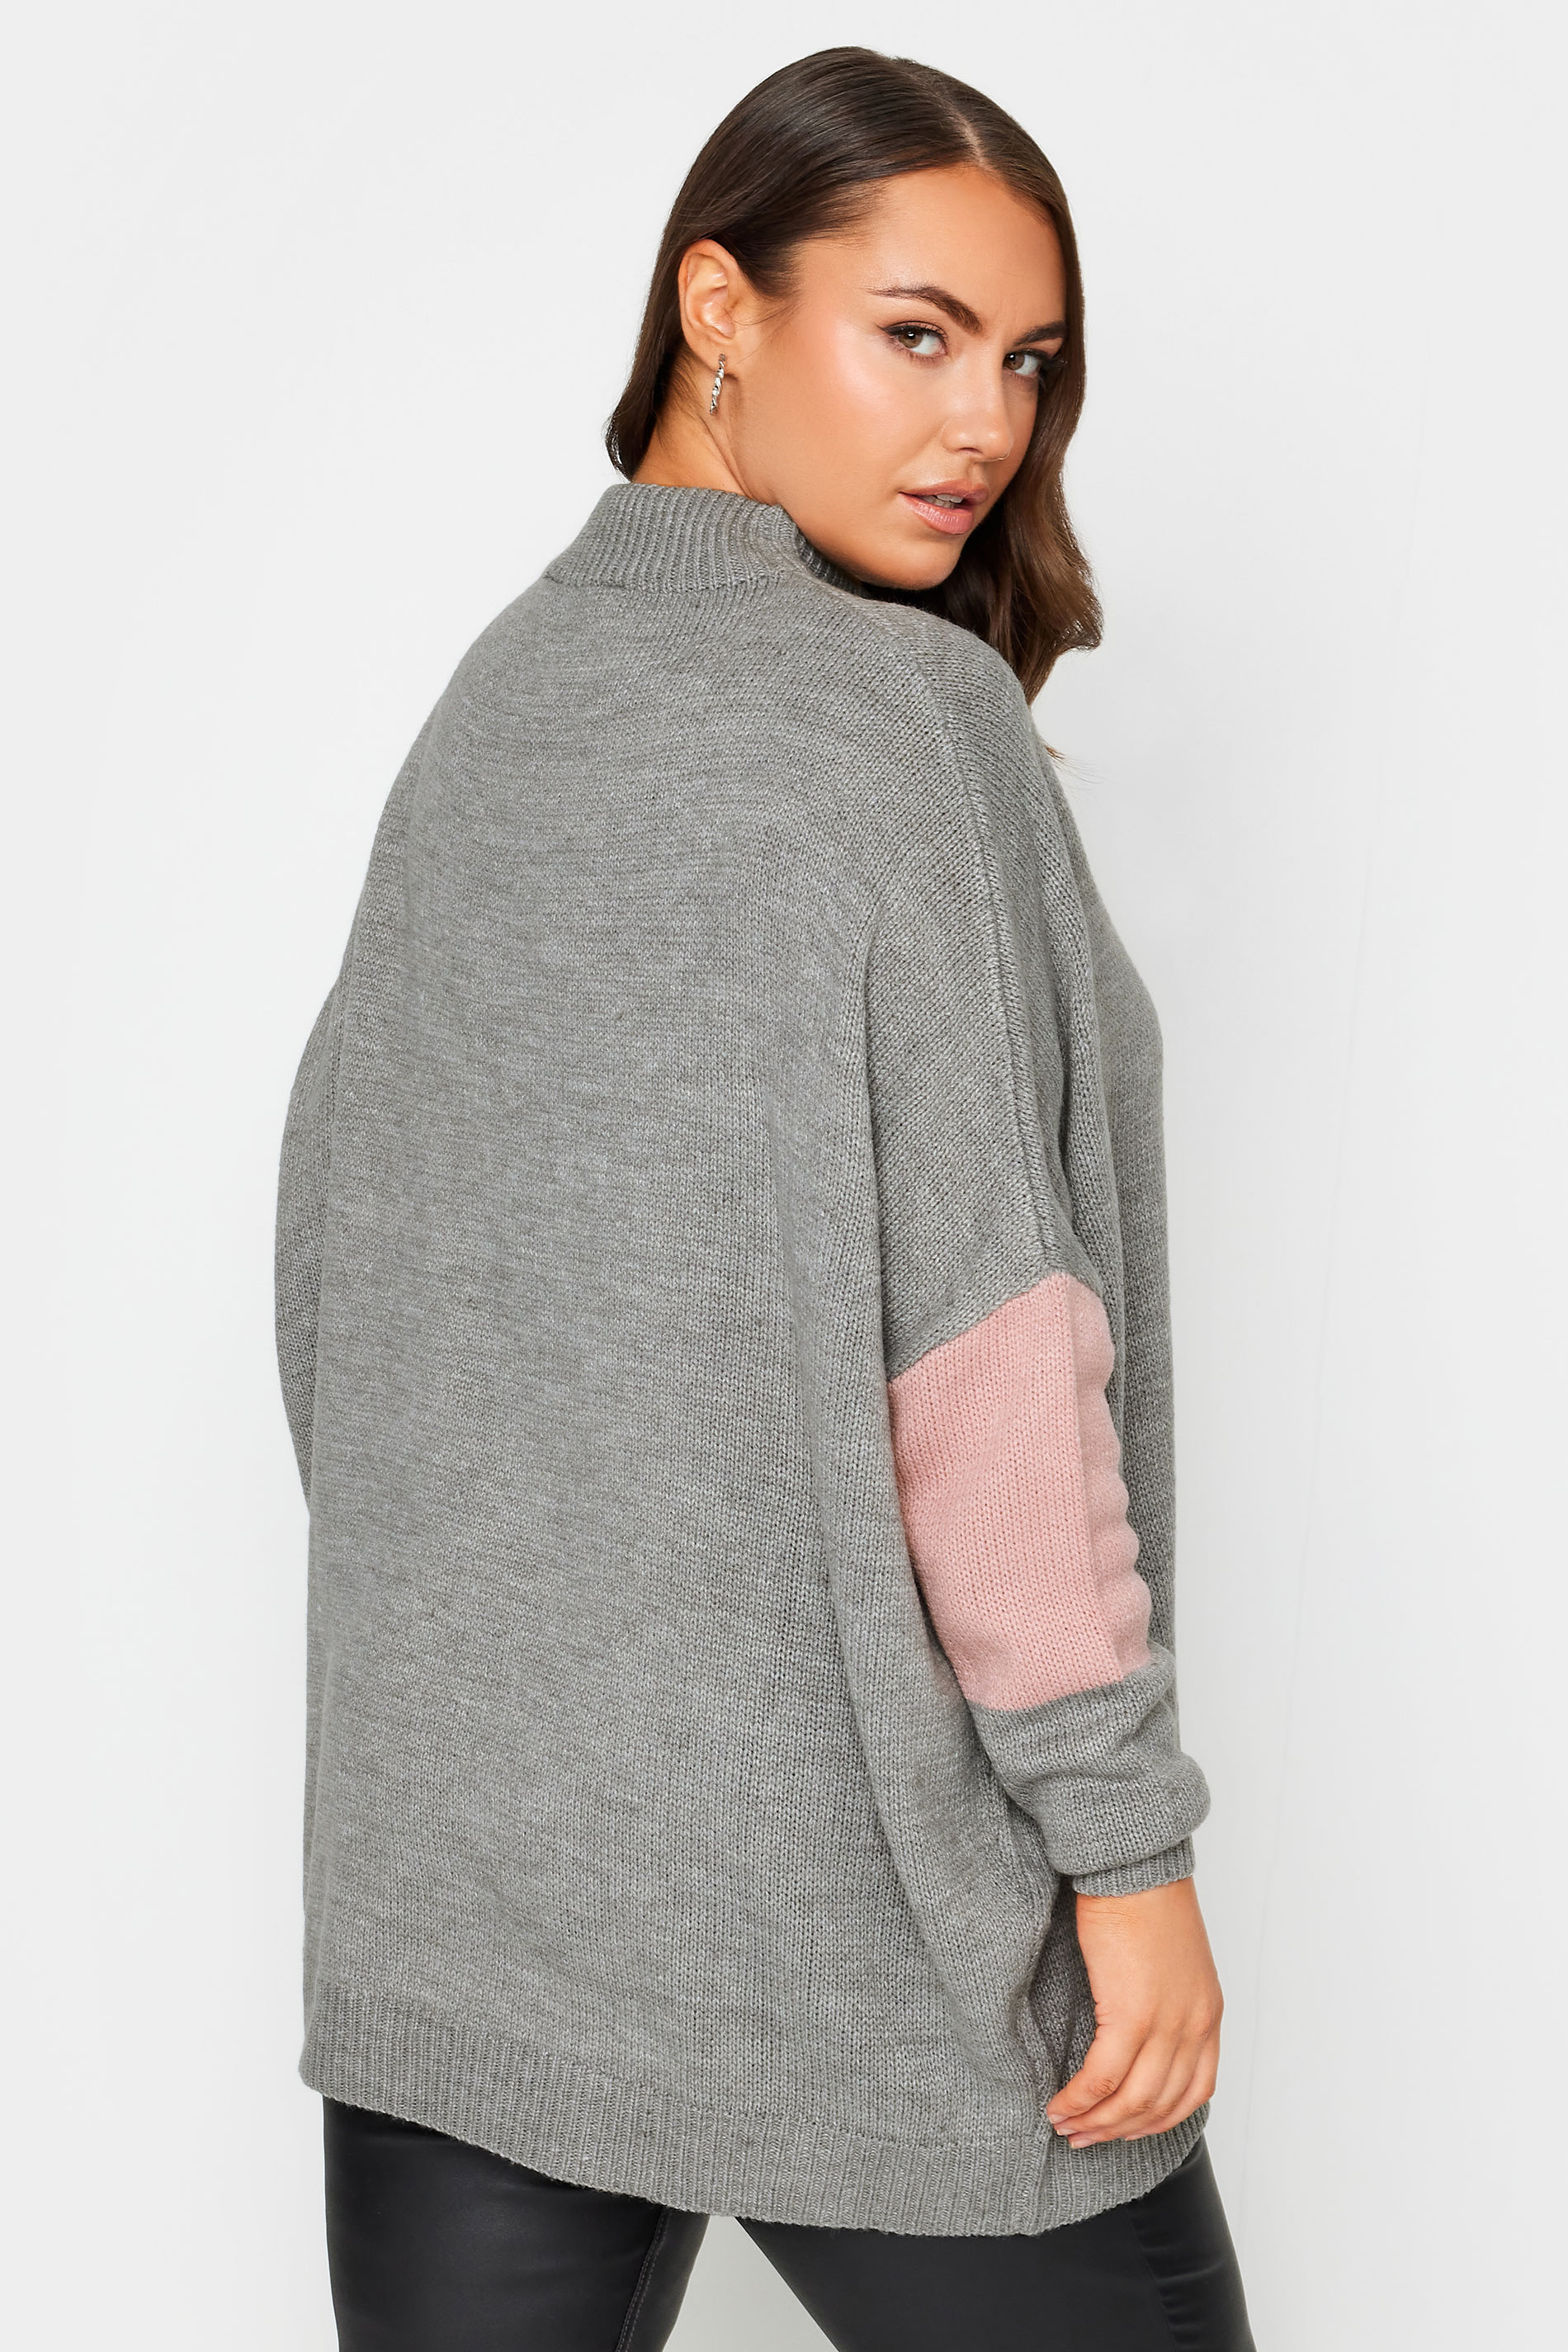 YOURS Plus Size Grey & Pink Colourblock Knitted Jumper | Yours Clothing 3